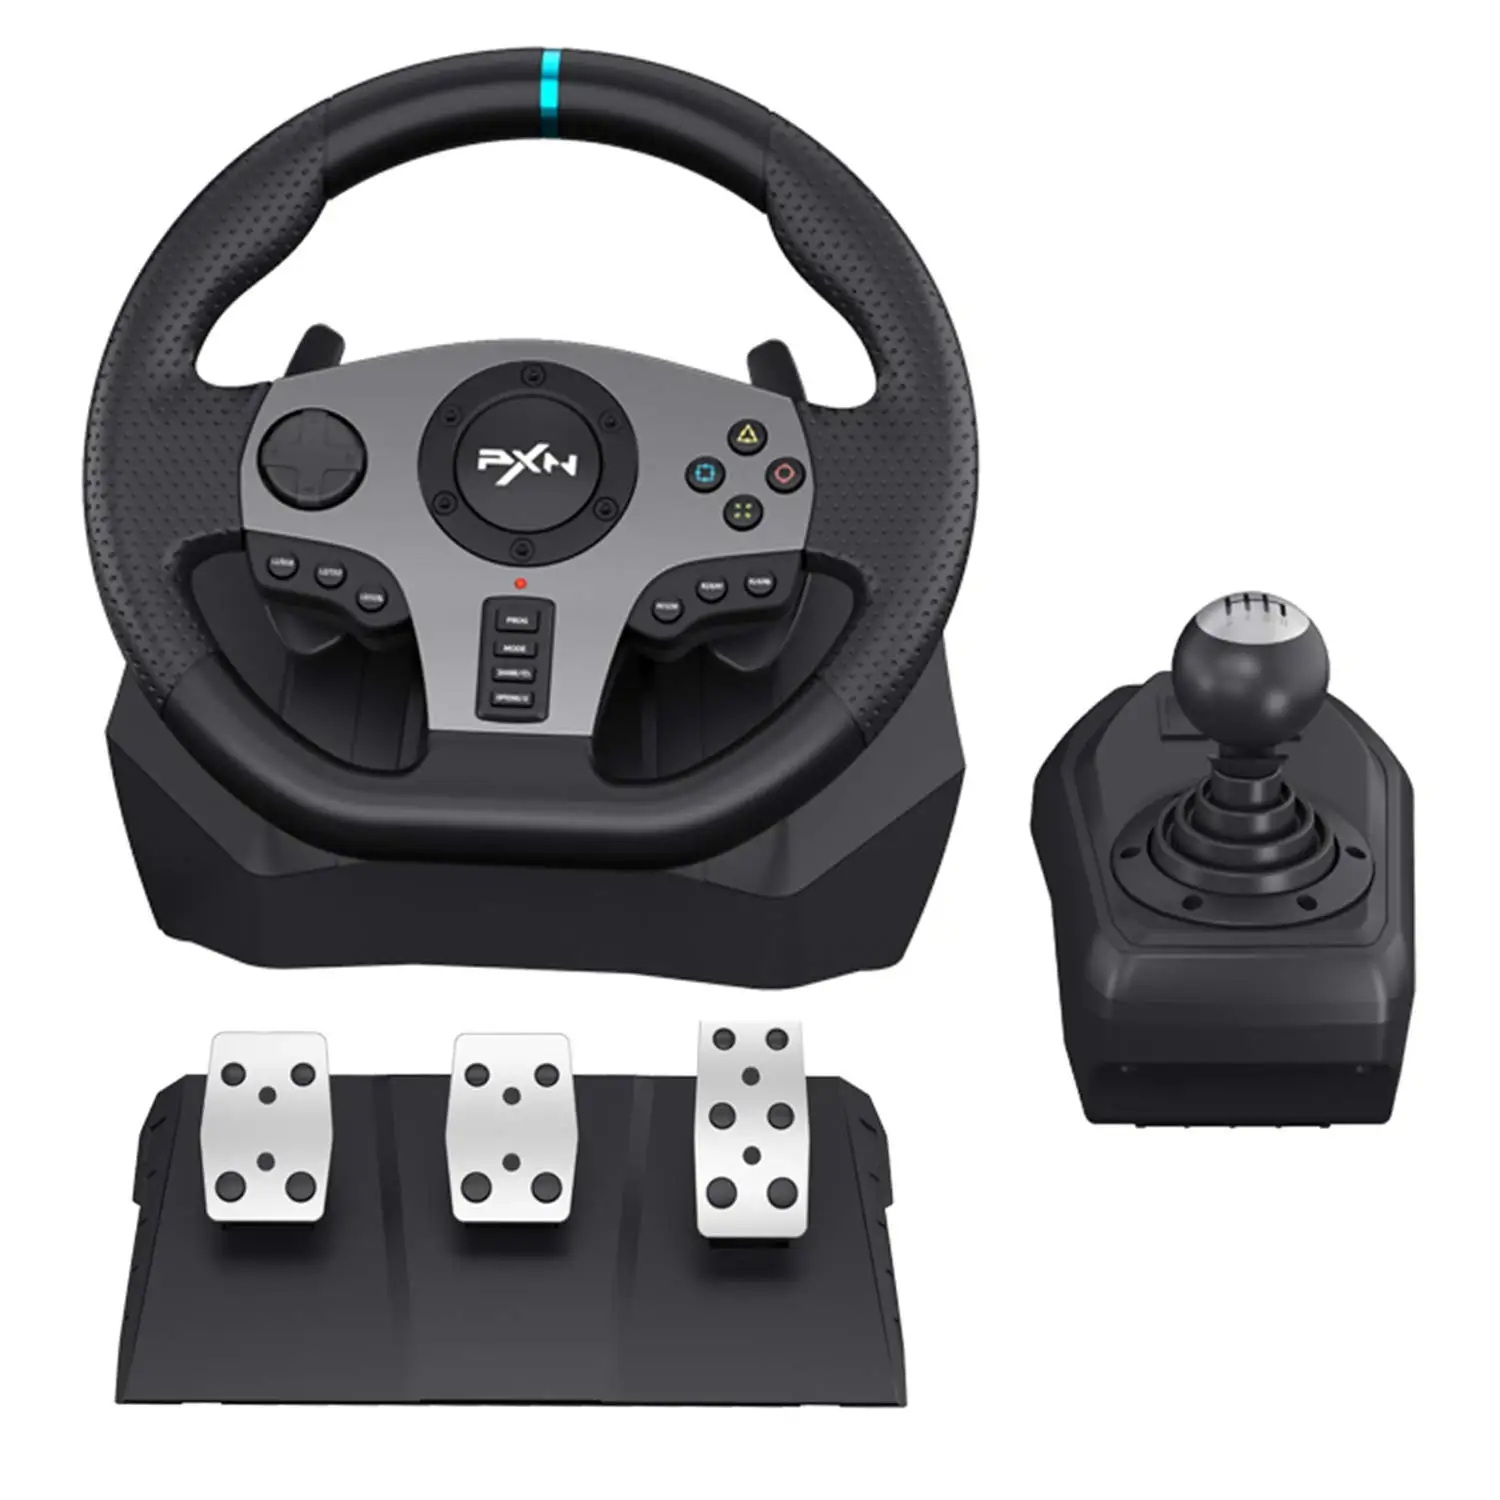 Amazon Best Pxn V9 Wired Steering Wheel For Ps4 With Pedals&shifter Wheel Controller For Ps3/ps4/xbox One/x/s/pc/ Switch - Buy Amazon Best Steering Wheel,Steering Wheel For Ps4,Wheel Controller Pc Product on Alibaba.com